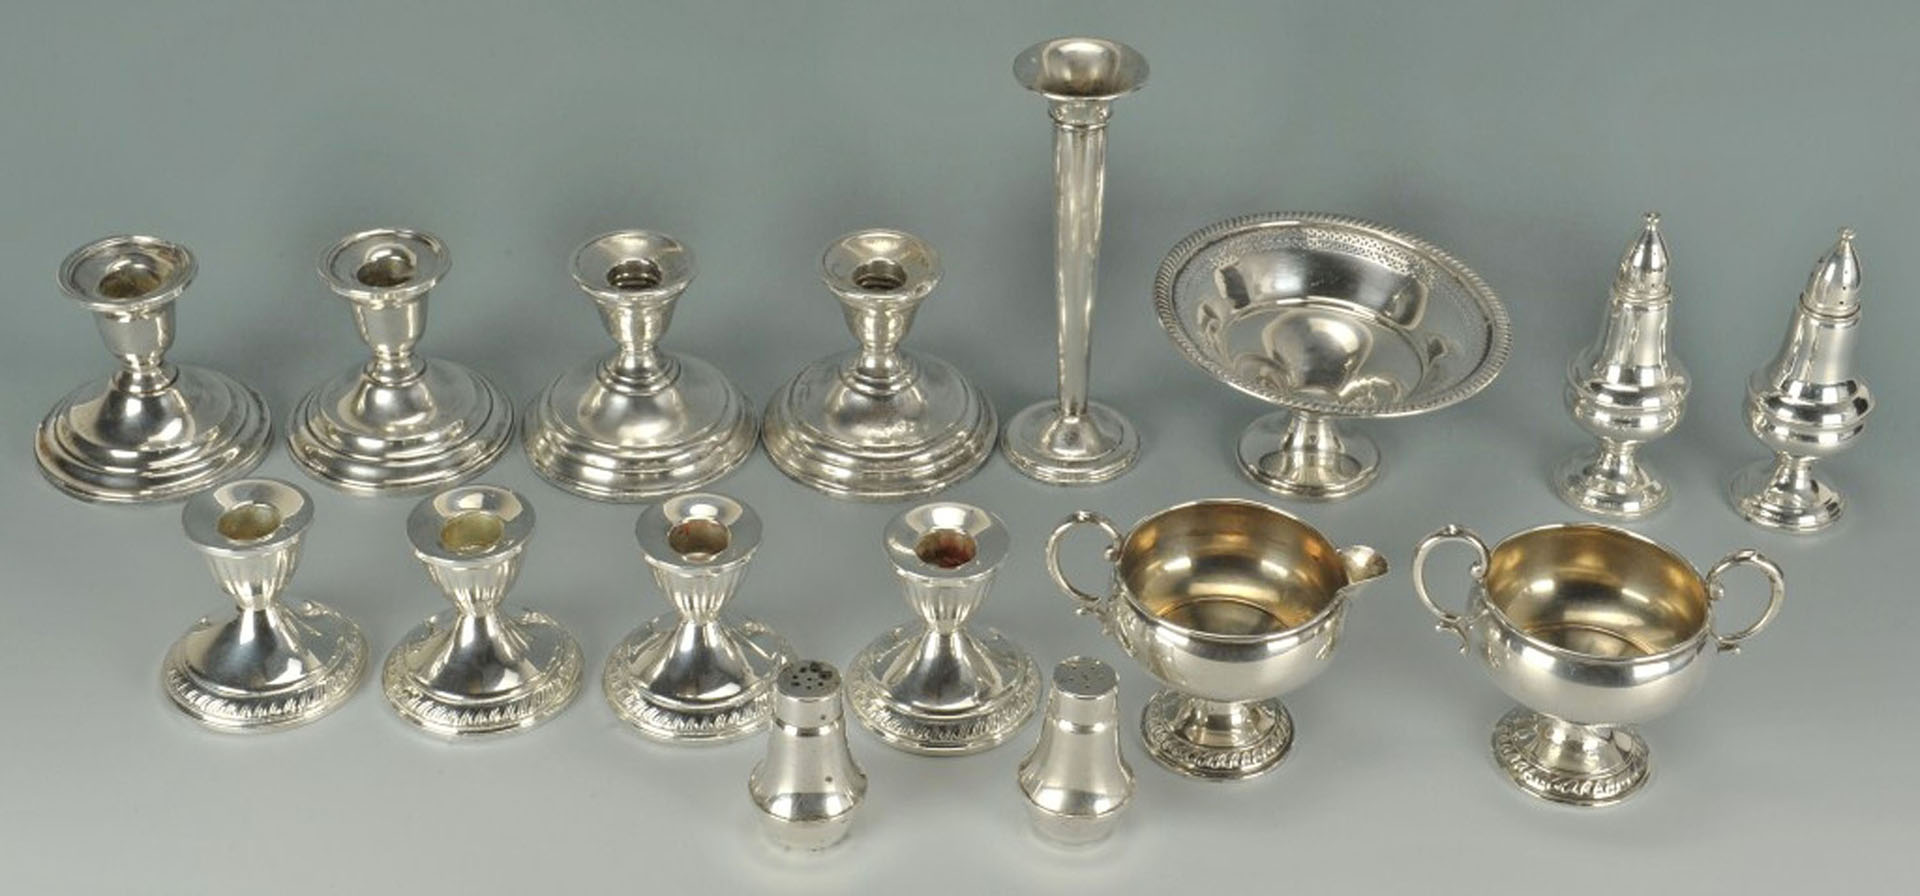 Lot 730: Grouping of Weighted Sterling Silver, 16 pcs.